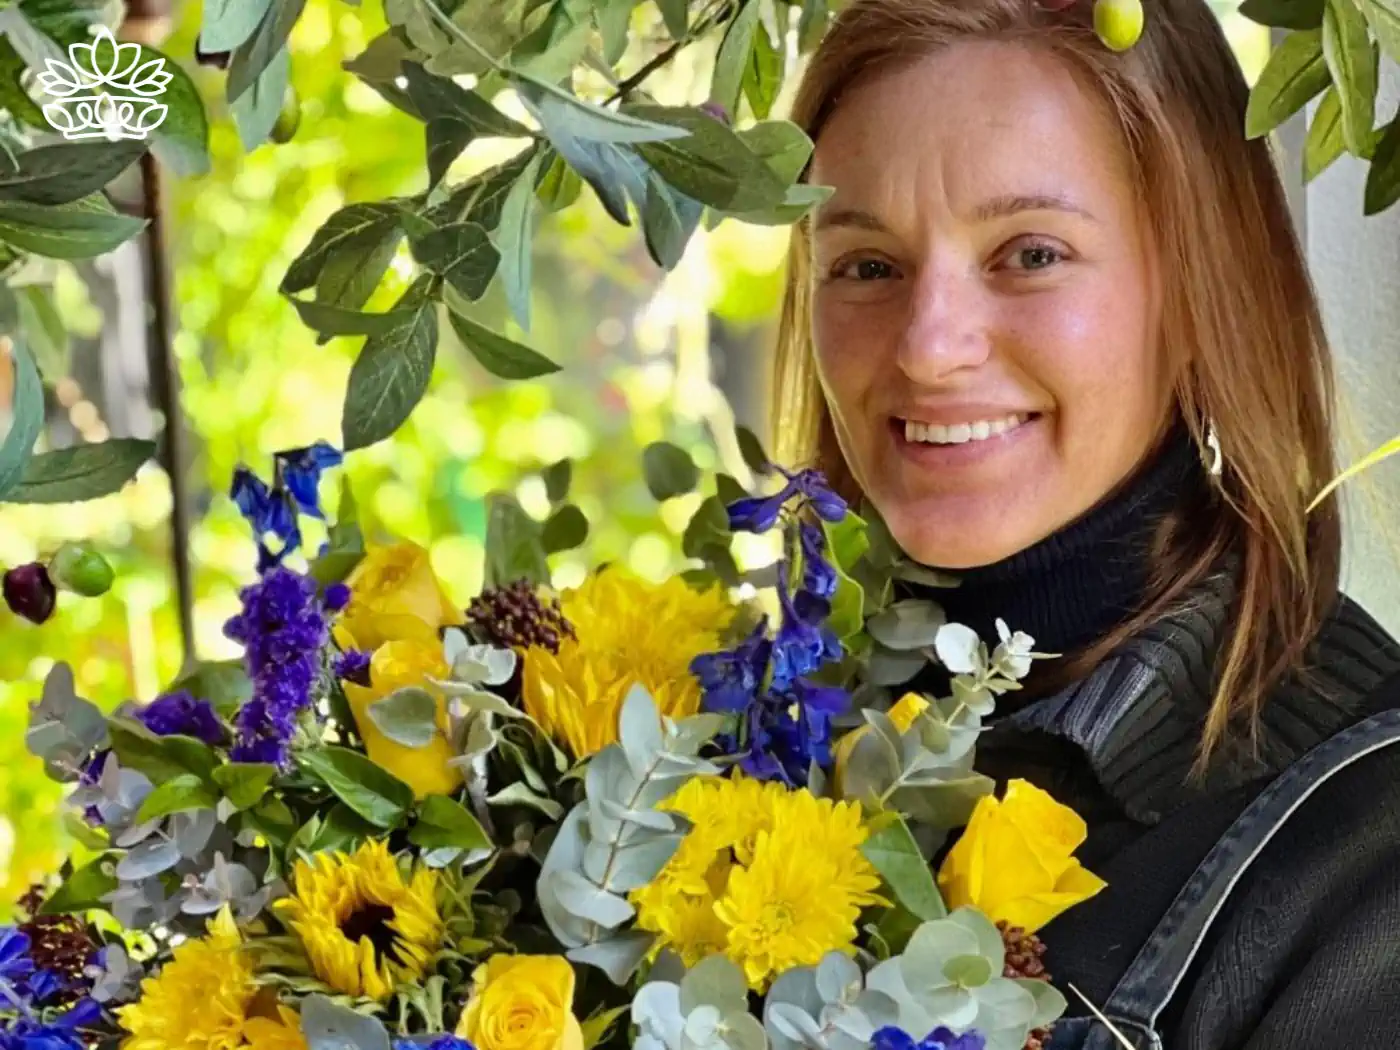 A smiling sa florist holds a luxurious bouquet featuring roses and other flowers, artfully arranged and vibrant in color, within a lush, green garden setting. This image highlights the beauty of flower delivery from a local flower shop. Fabulous Flowers and Gifts.